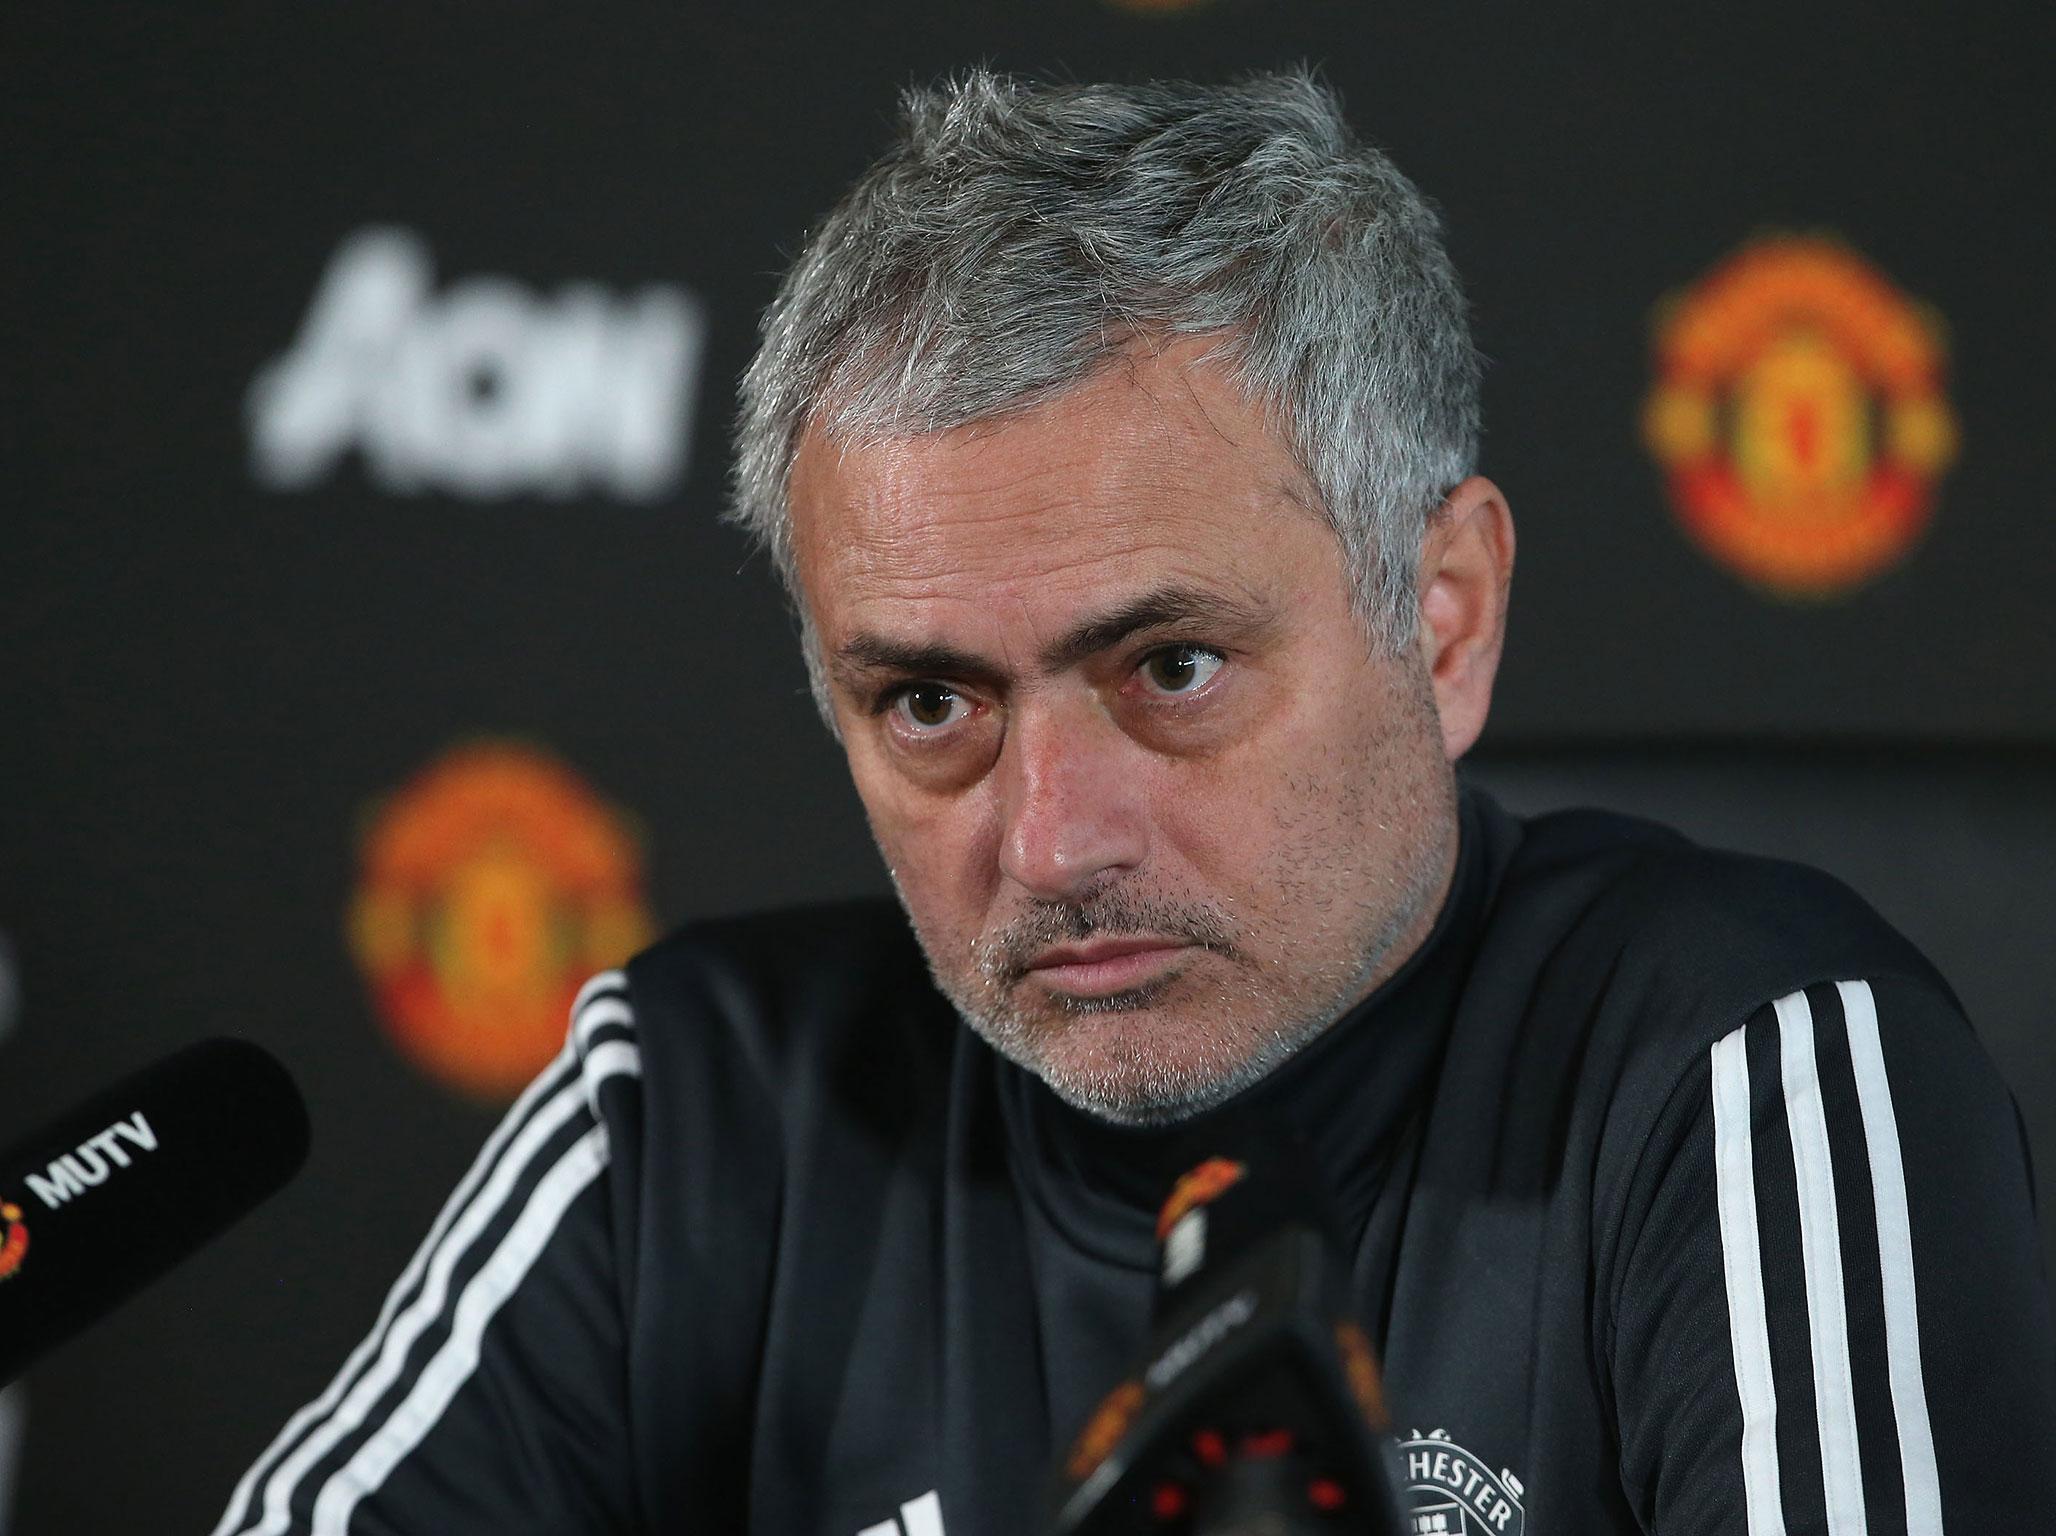 Jose Mourinho claimed a 'diversity' of opinions led to the Manchester tunnel bust-up